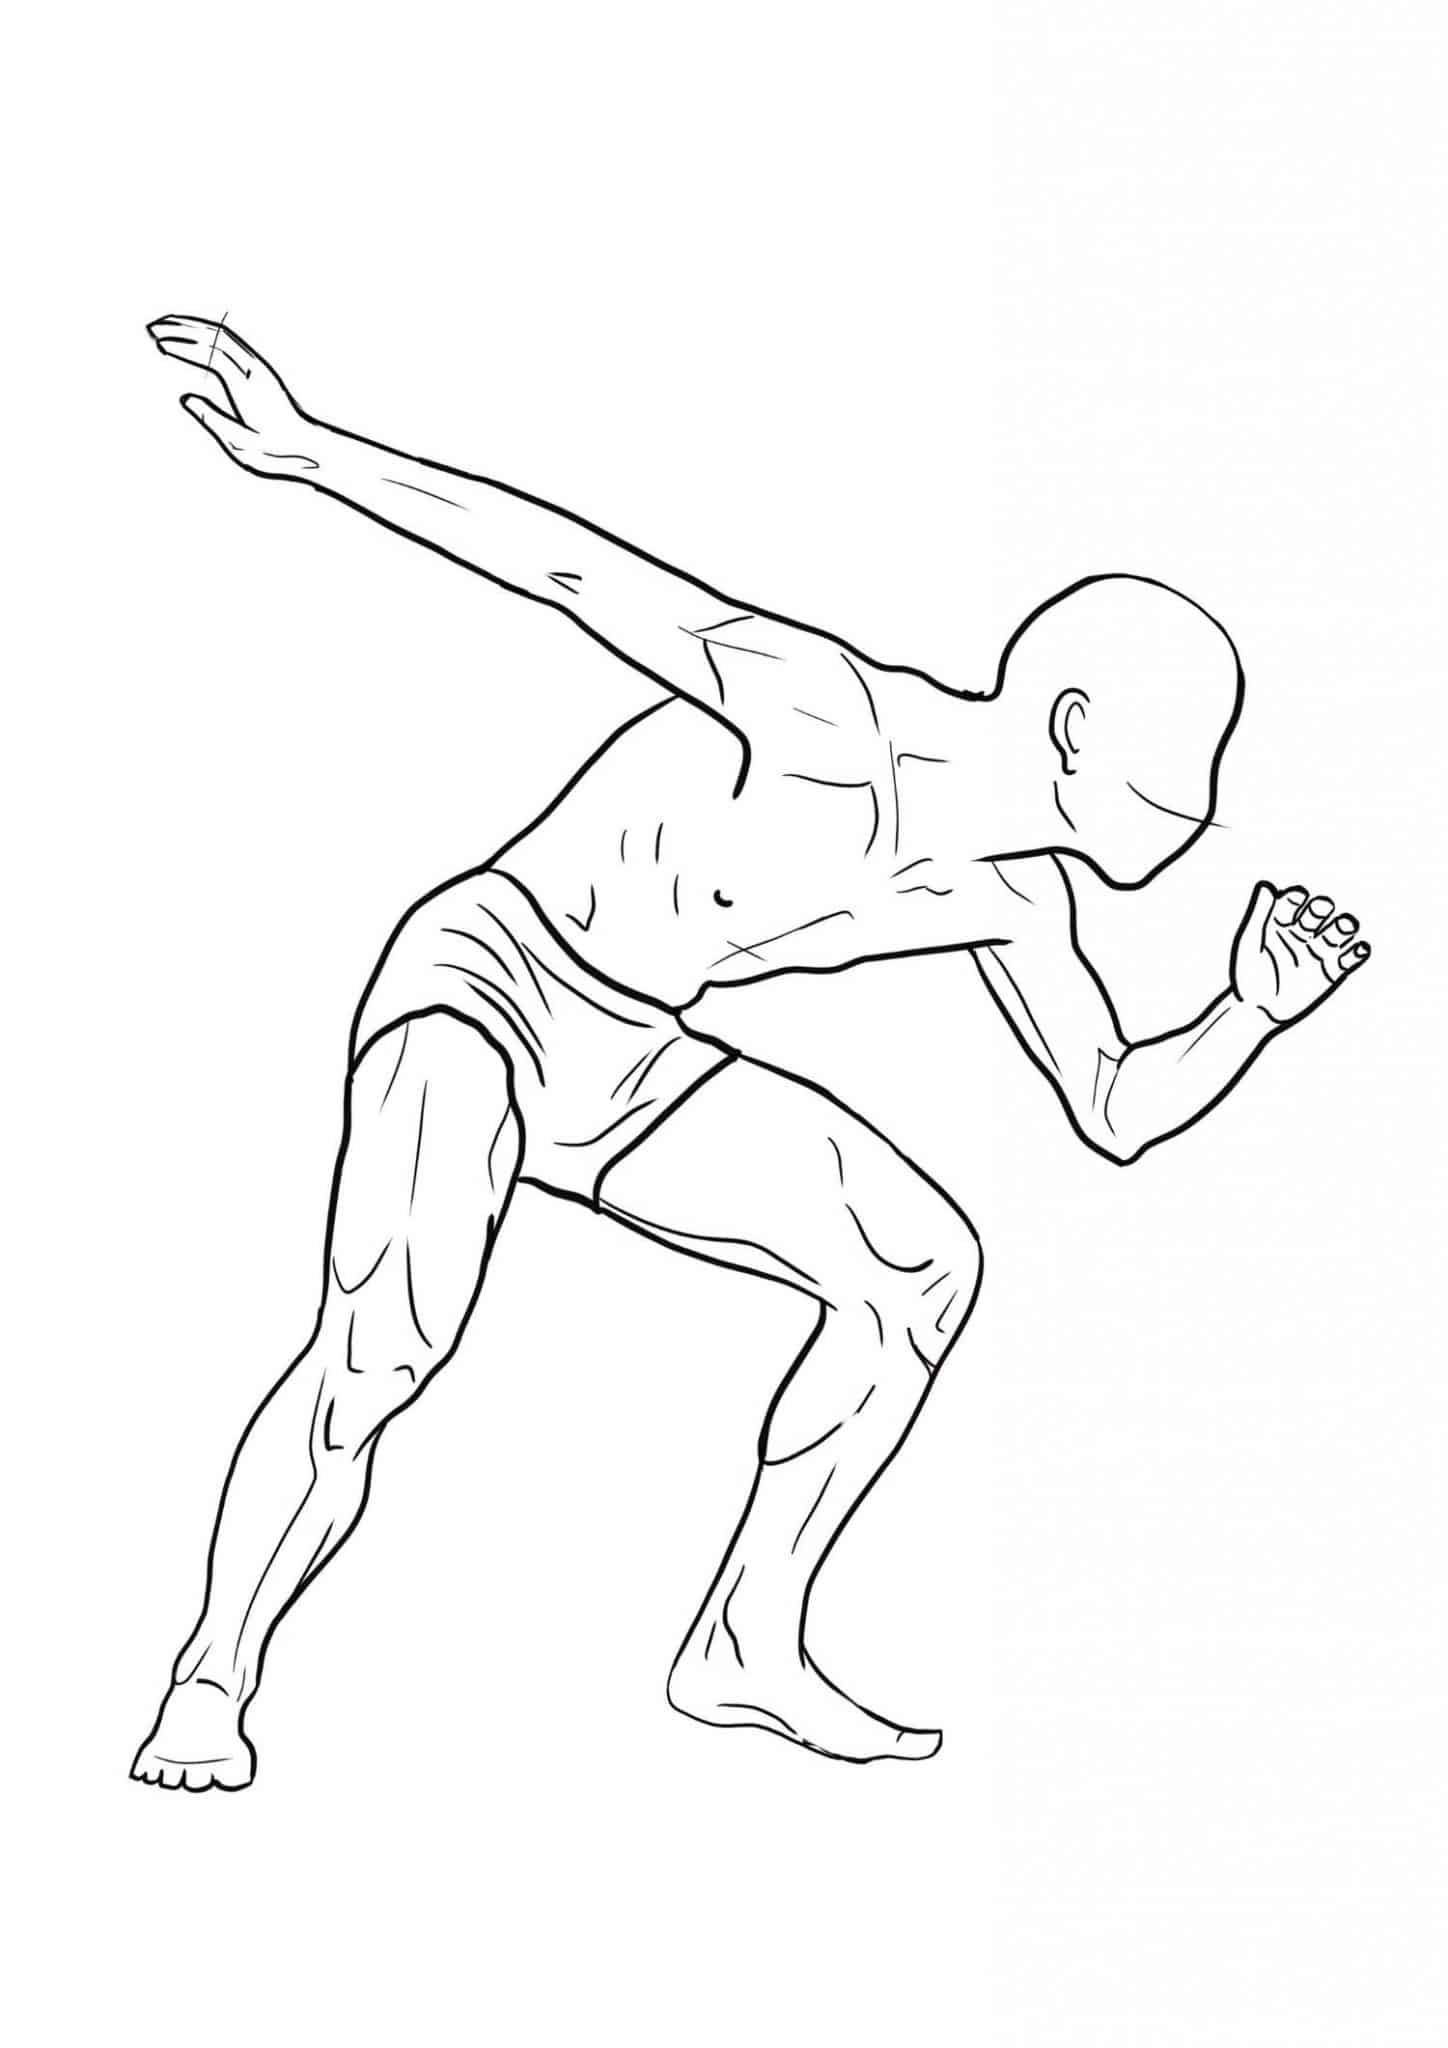 Art of Movement 15 Powerful Male Poses for Dynamic Drawings Artsydee